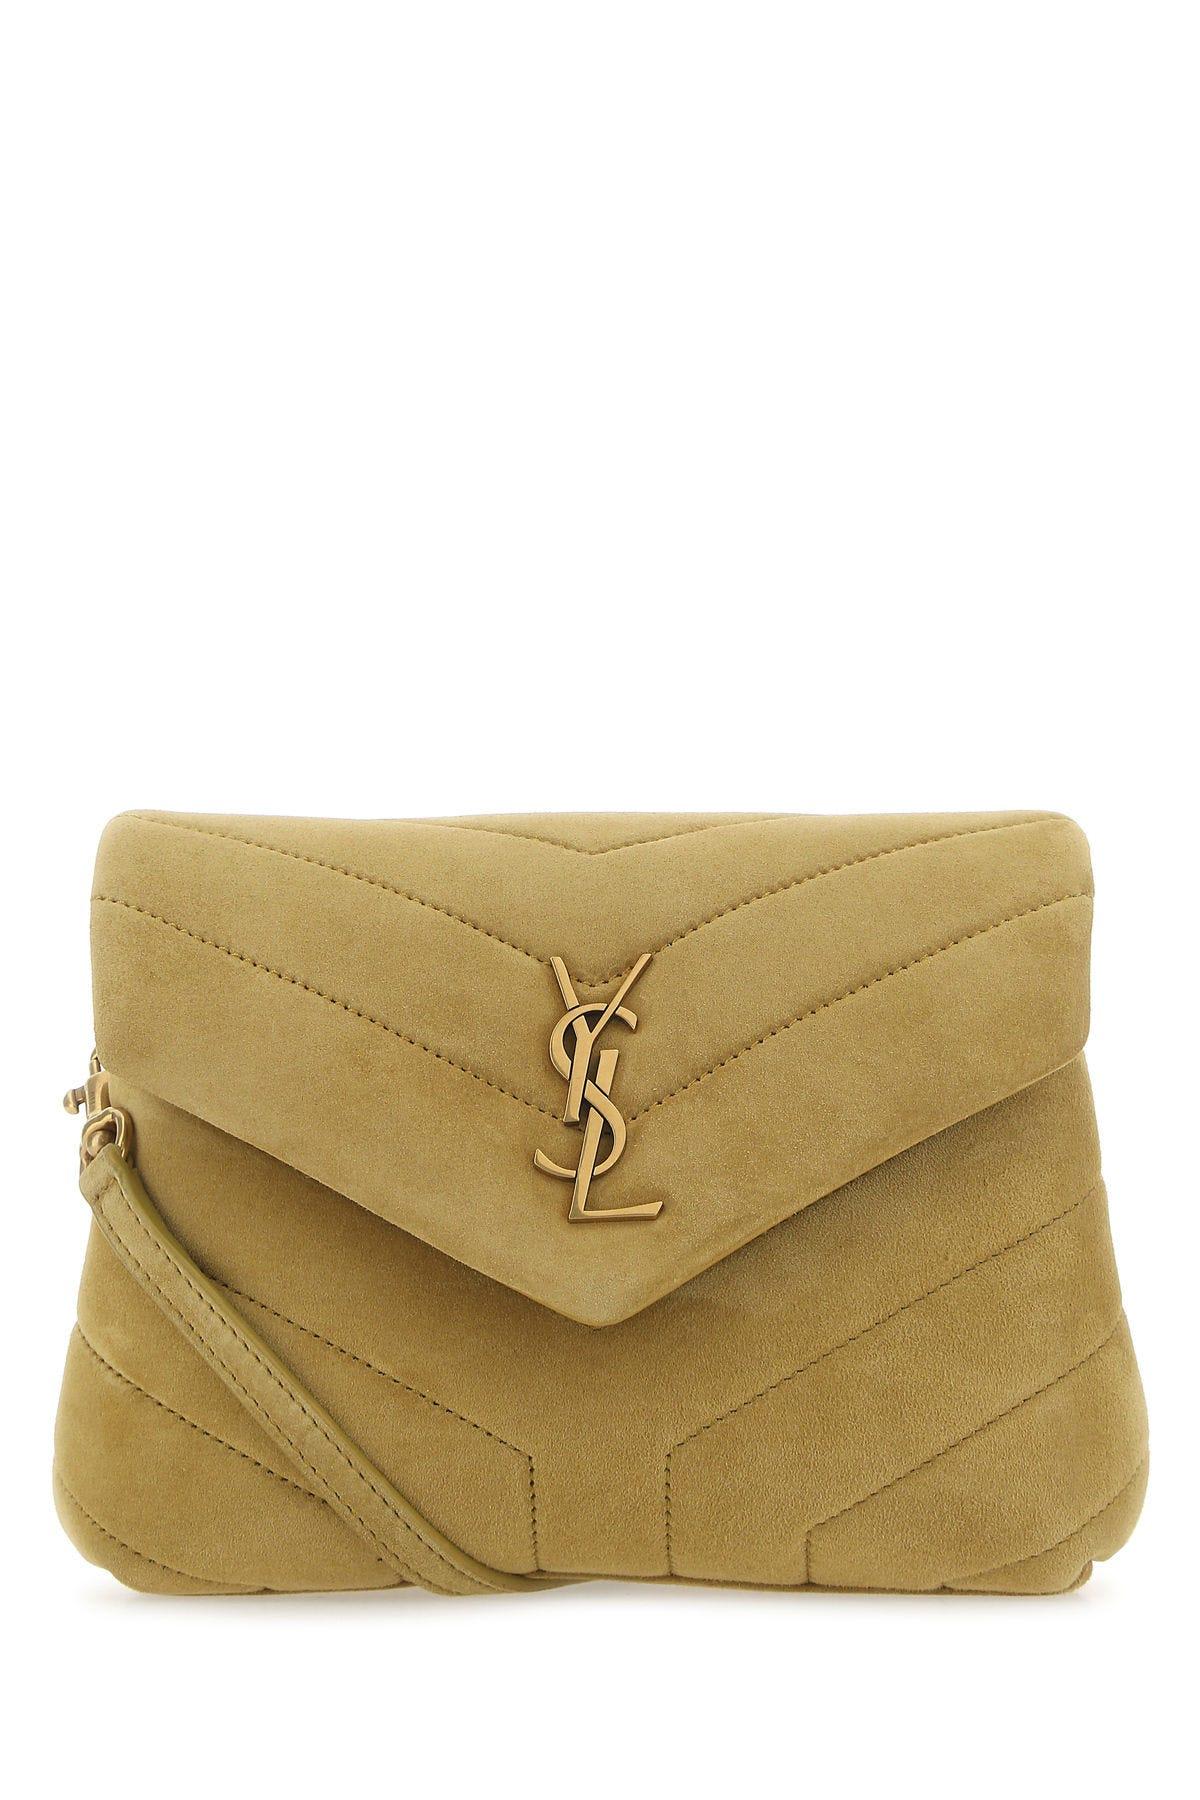 SAINT LAURENT MUSTARD SUEDE LEATHER TOY LOULOU CROSSBODY BAG